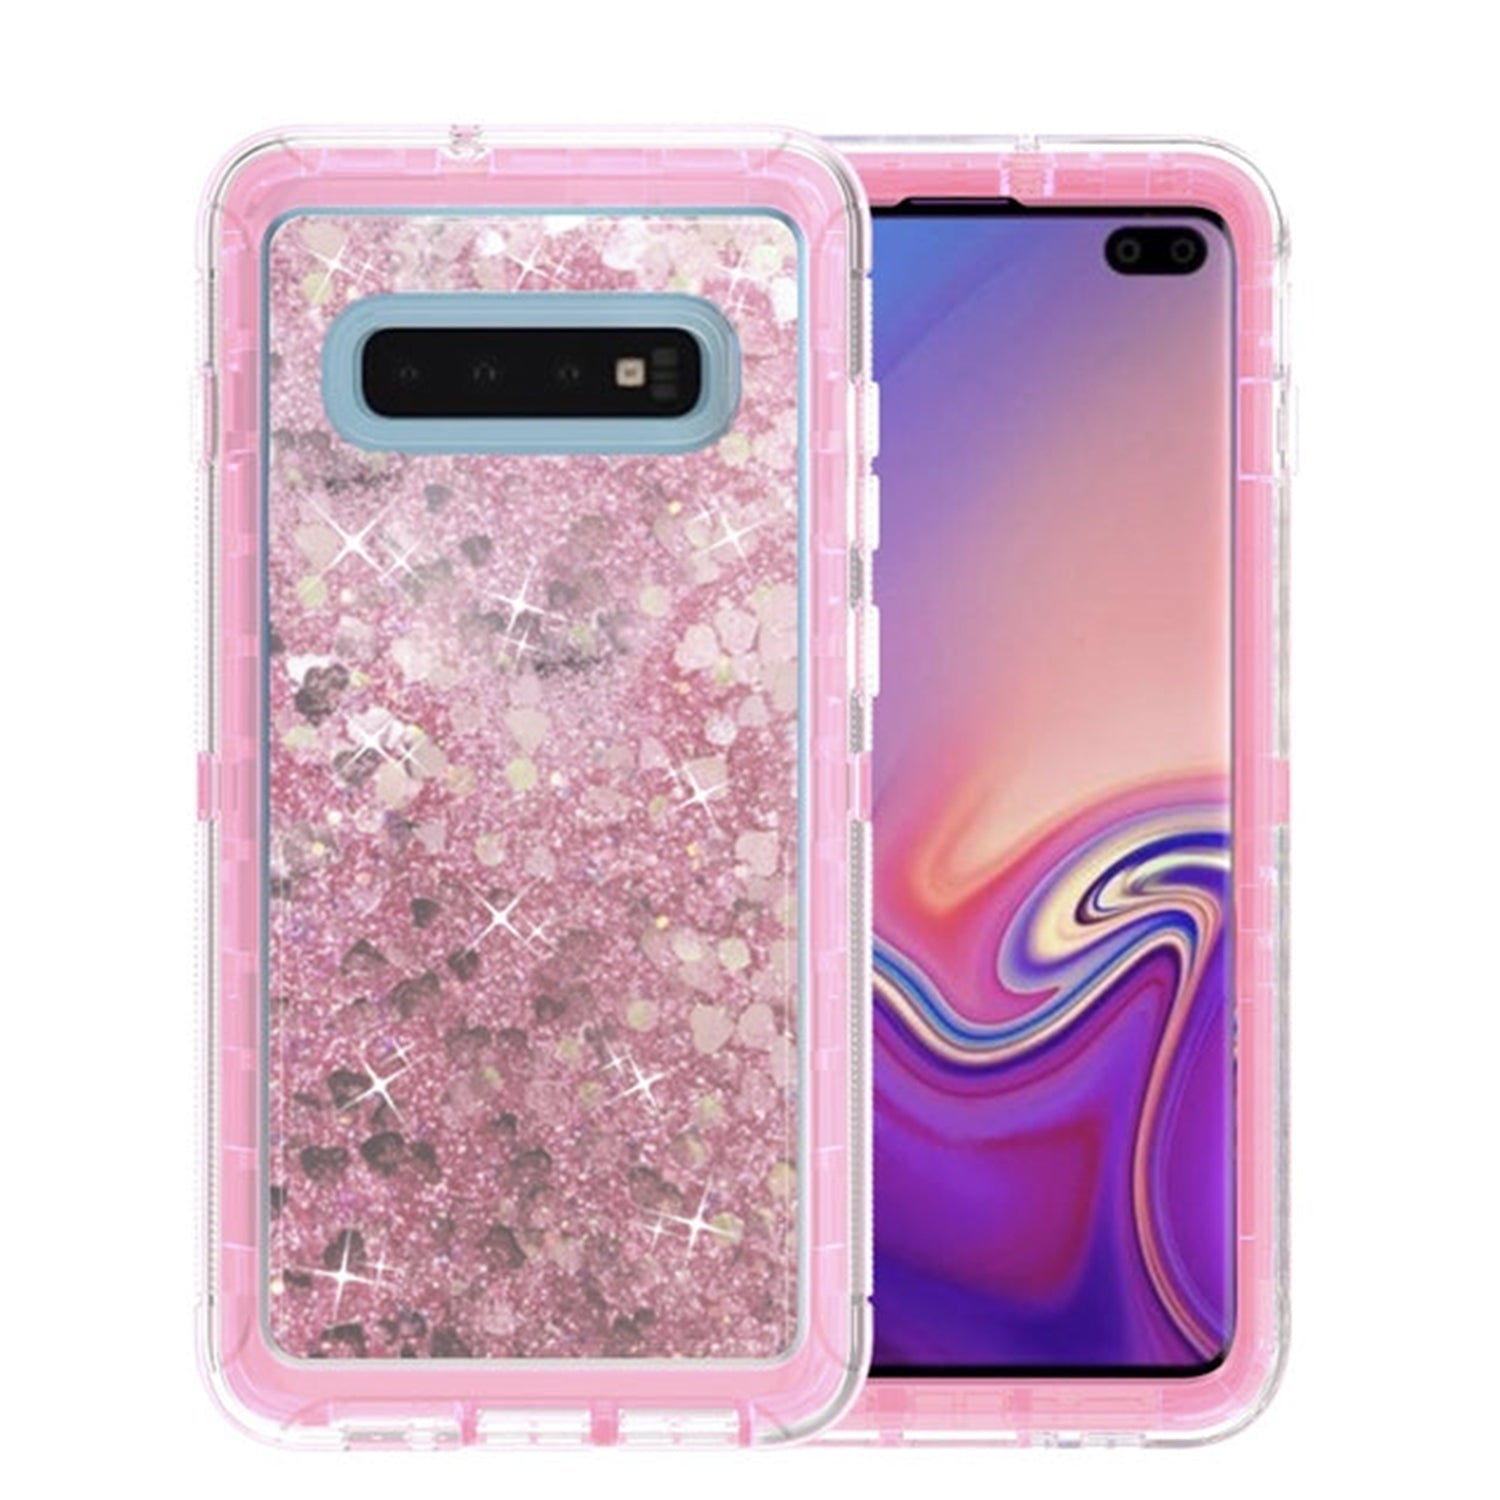 Transparent Floating Glitter Heavy Duty Case for Galaxy S10 Plus (6.4")